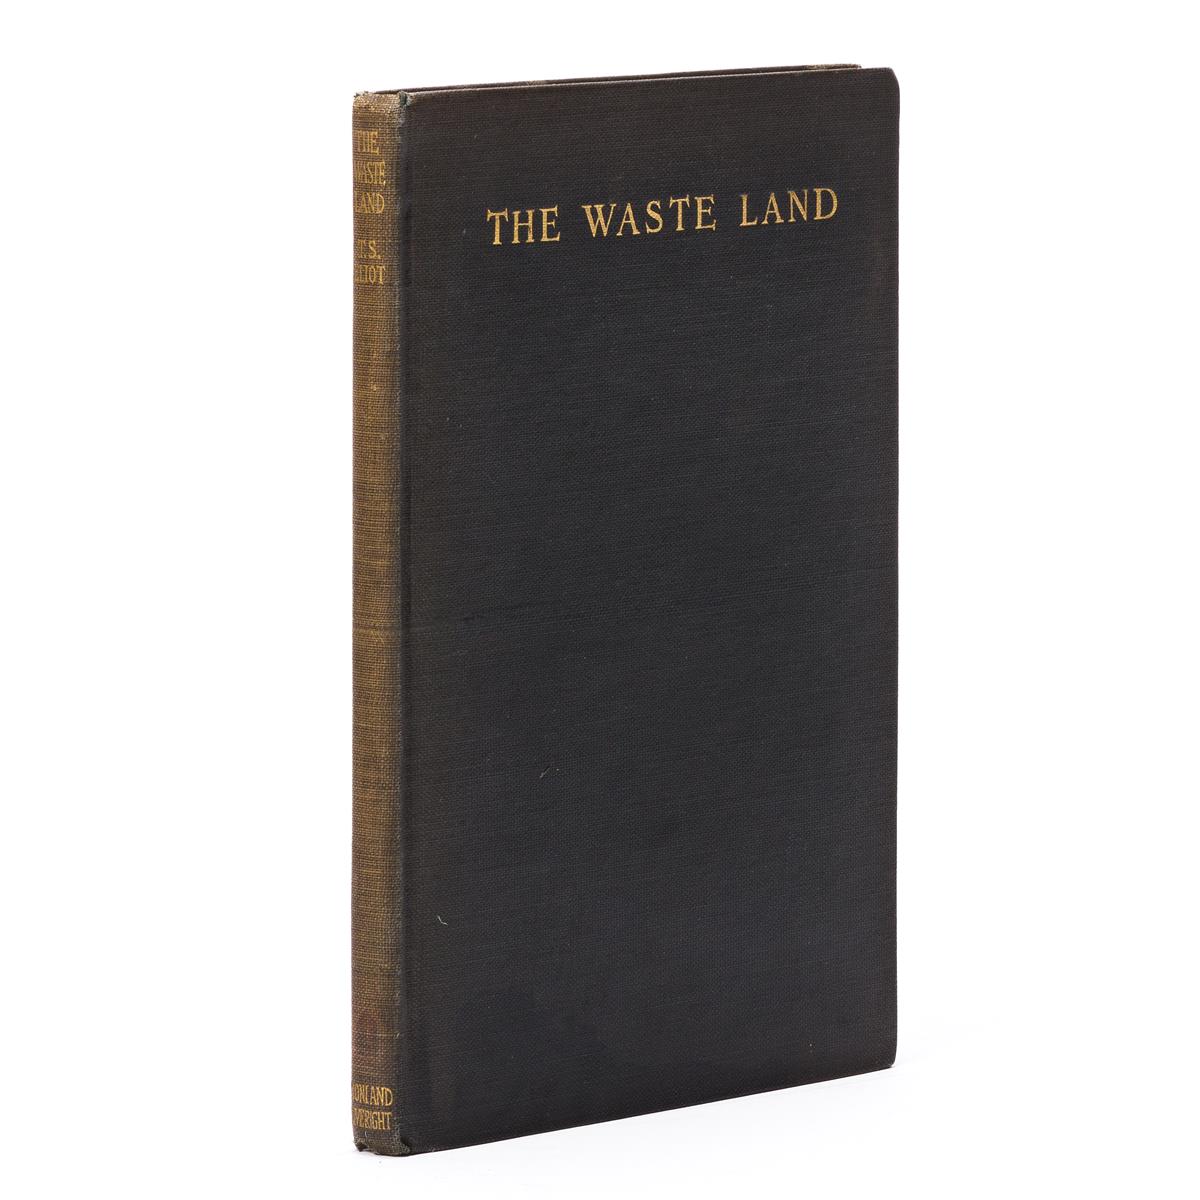 ELIOT, T.S. The Waste Land.